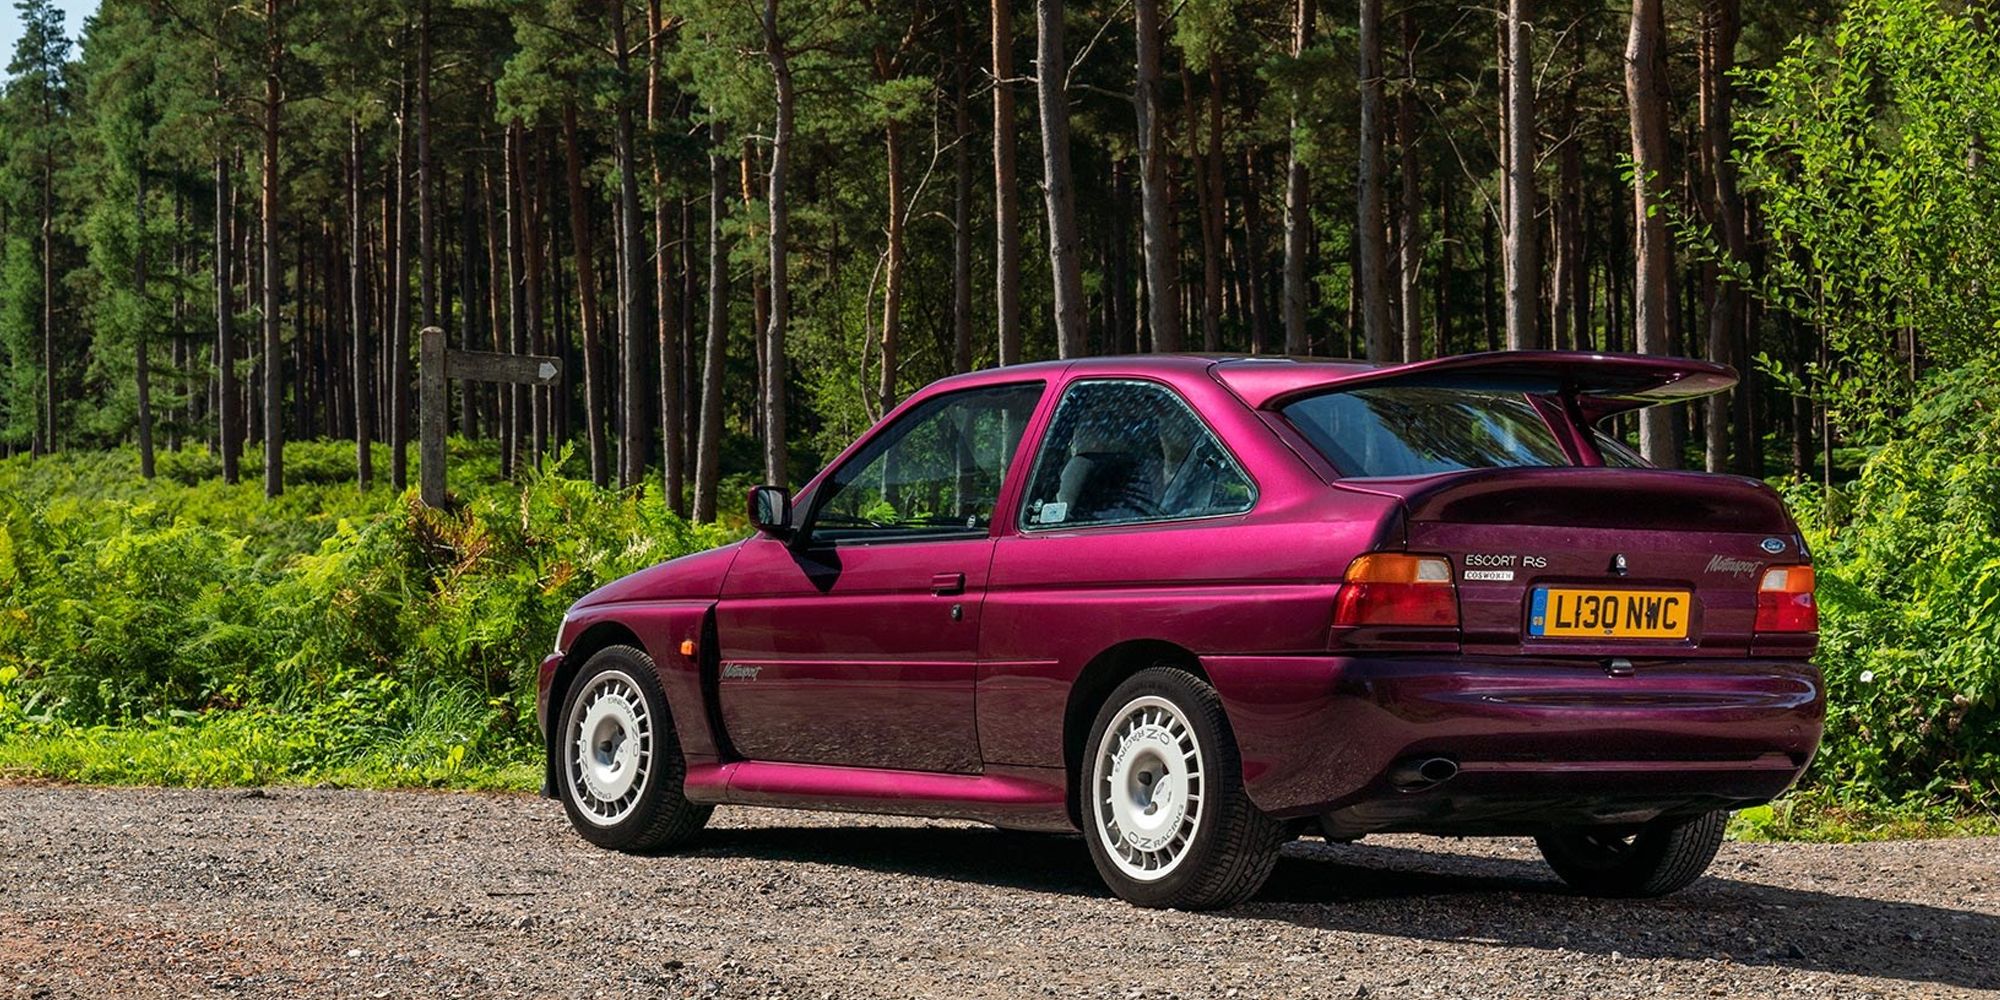 The rear of the Escort RS Cosworth